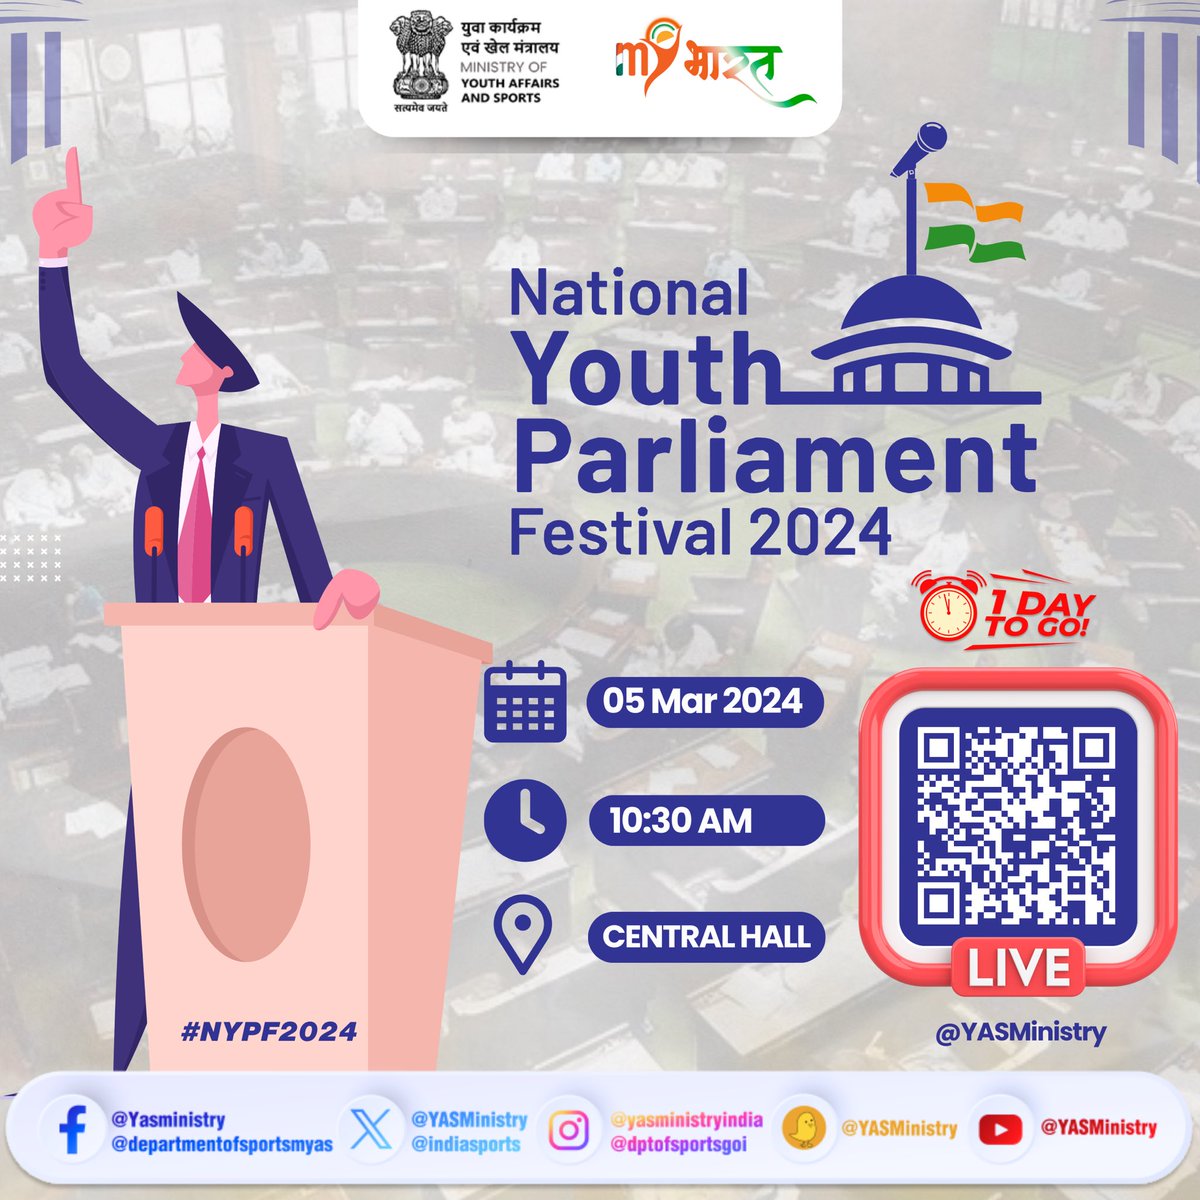 Just 1 day to go!! 🤩 Get ready for the 5th National Youth Parliament Festival 2024! Join us to elevate the voices of youth and empower them to engage in the nation's transformation. 🎤 Catch us LIVE🔴 youtube.com/live/IR1iZf1V_… #NYPF2024 #NationalYouthParliamentFestival2024